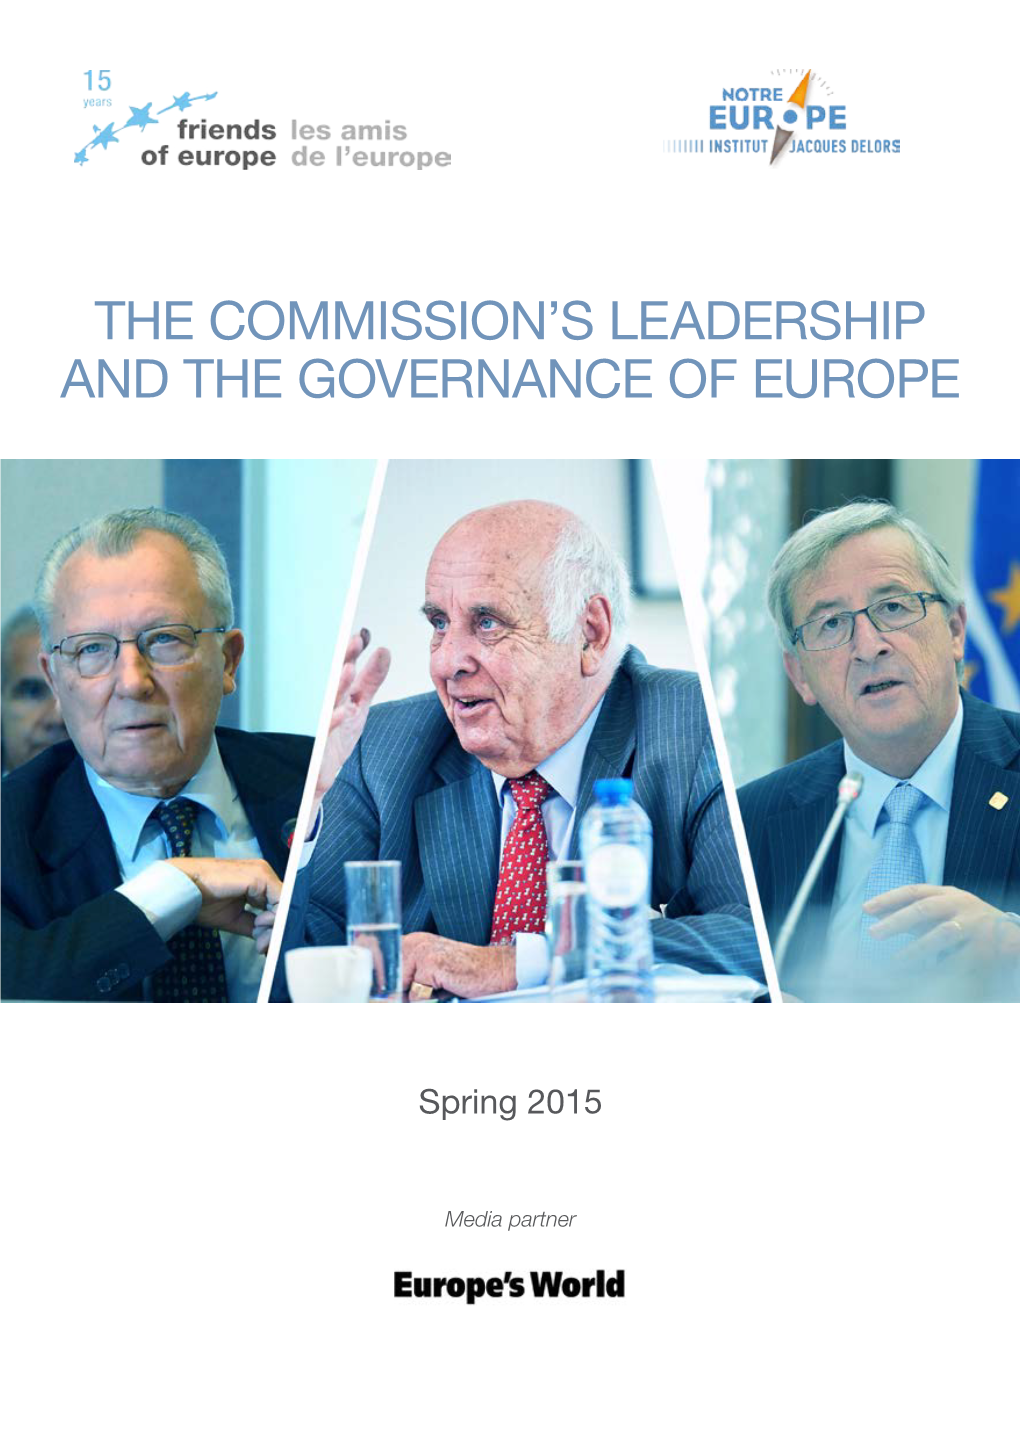 The Commission's Leadership and the Governance of Europe